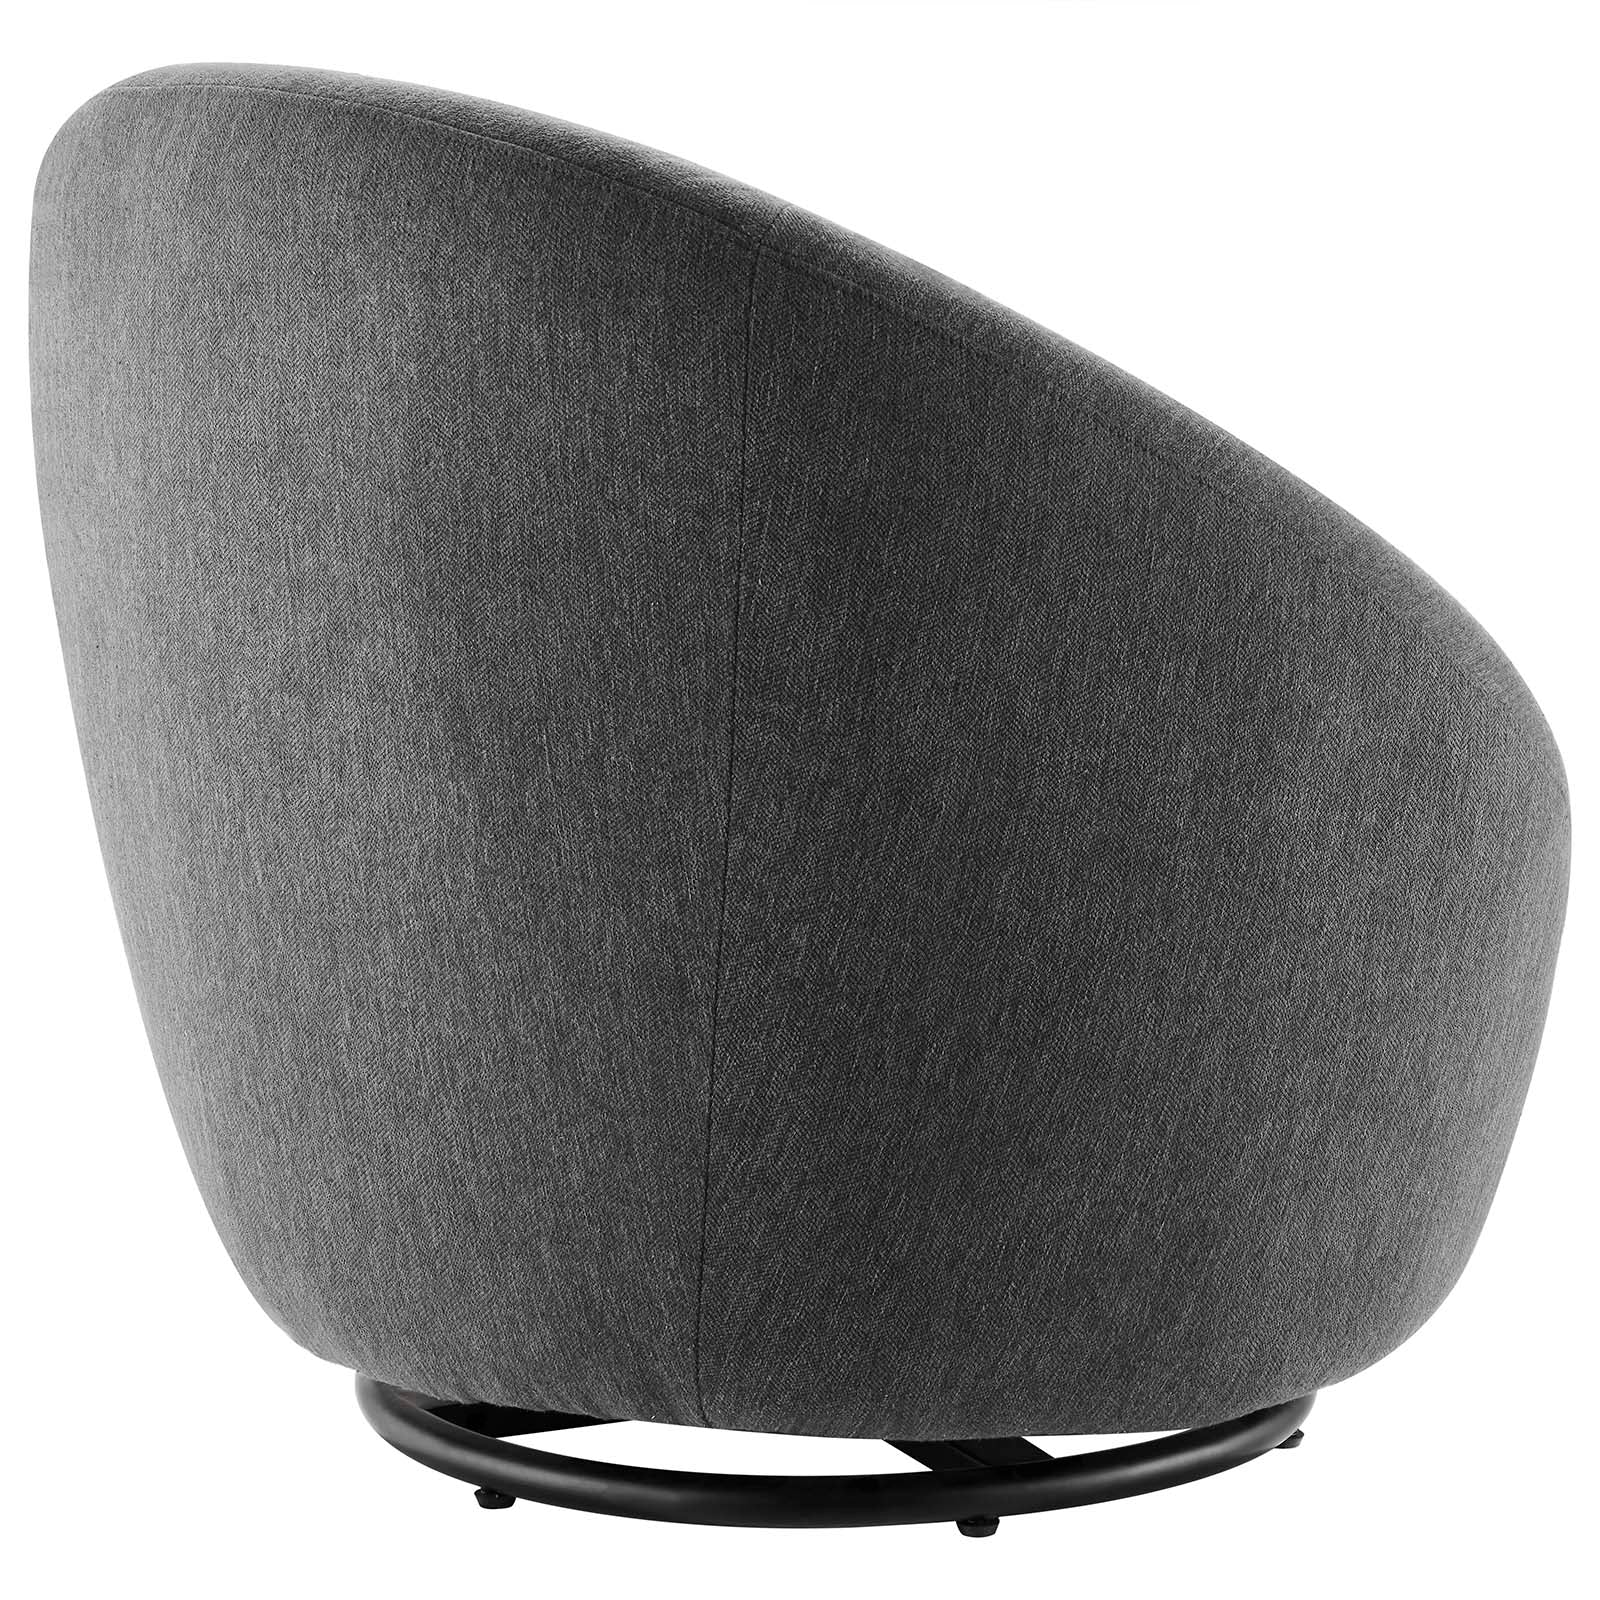 Modway Accent Chairs - Buttercup Fabric Upholstered Upholstered Fabric Swivel Chair Black Charcoal